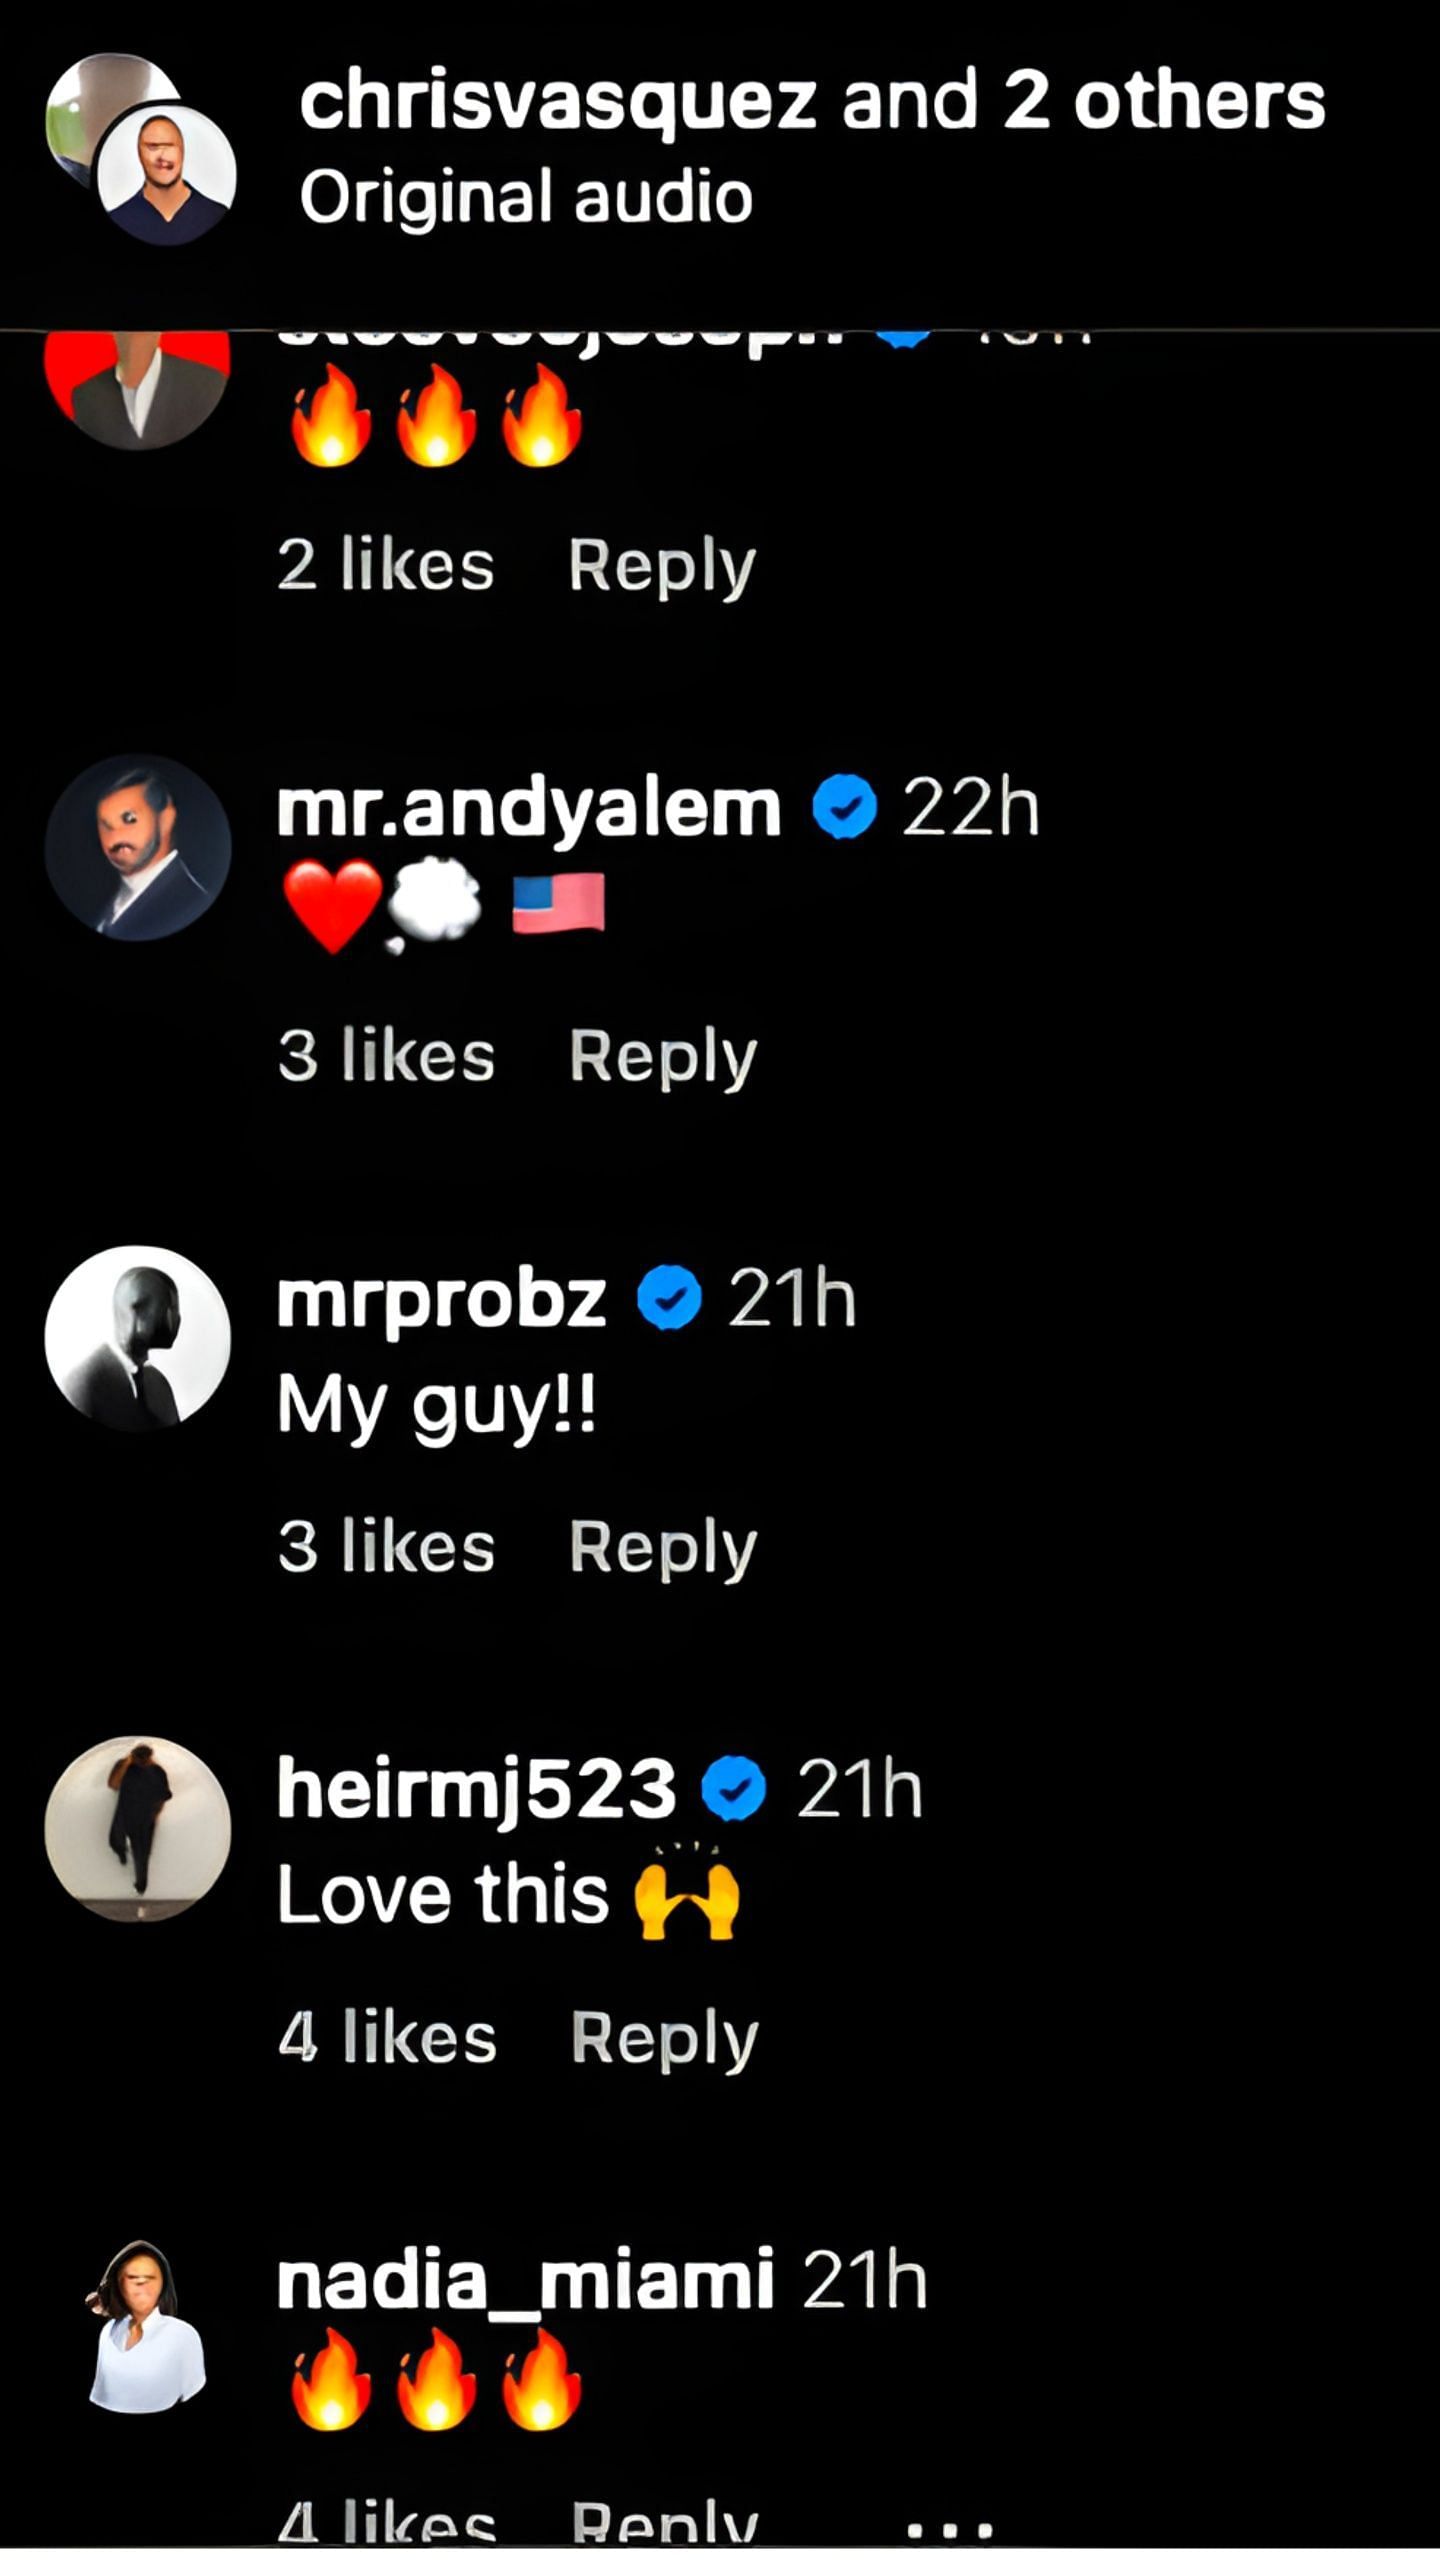 Marcus Jordan commented on the post